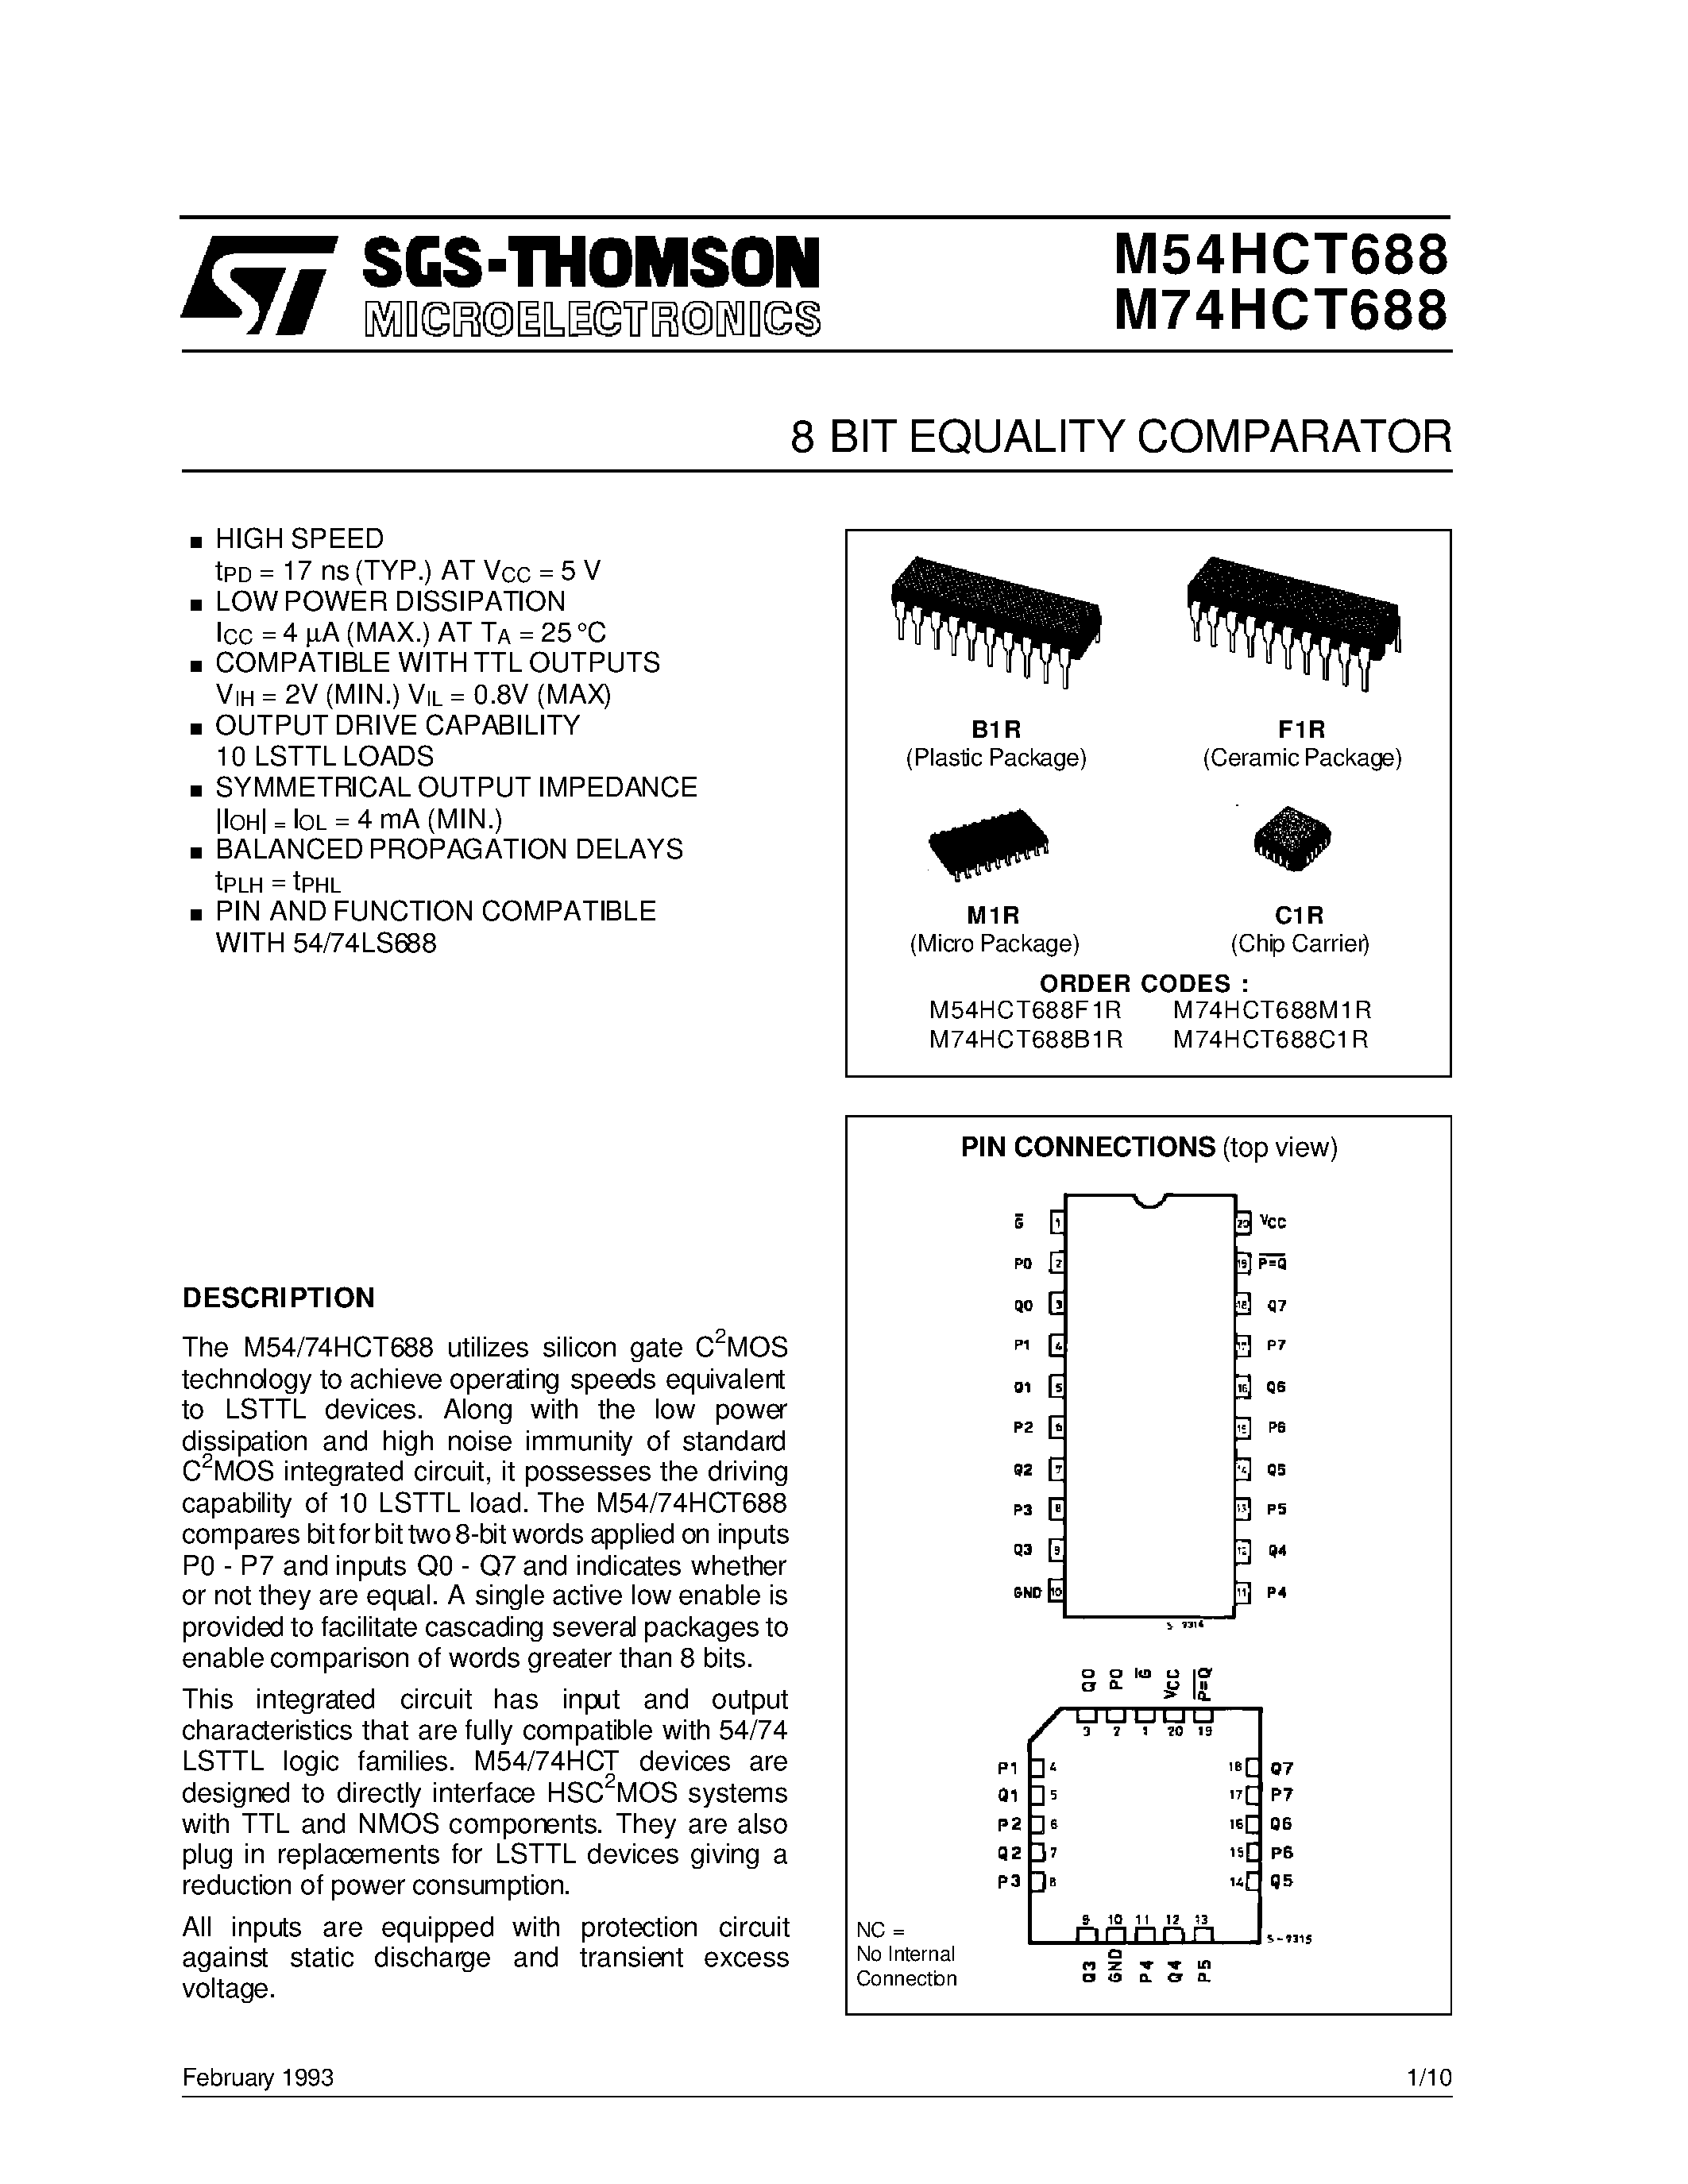 Datasheet M74HCT688 - 8 BIT EQUALITY COMPARATOR page 1